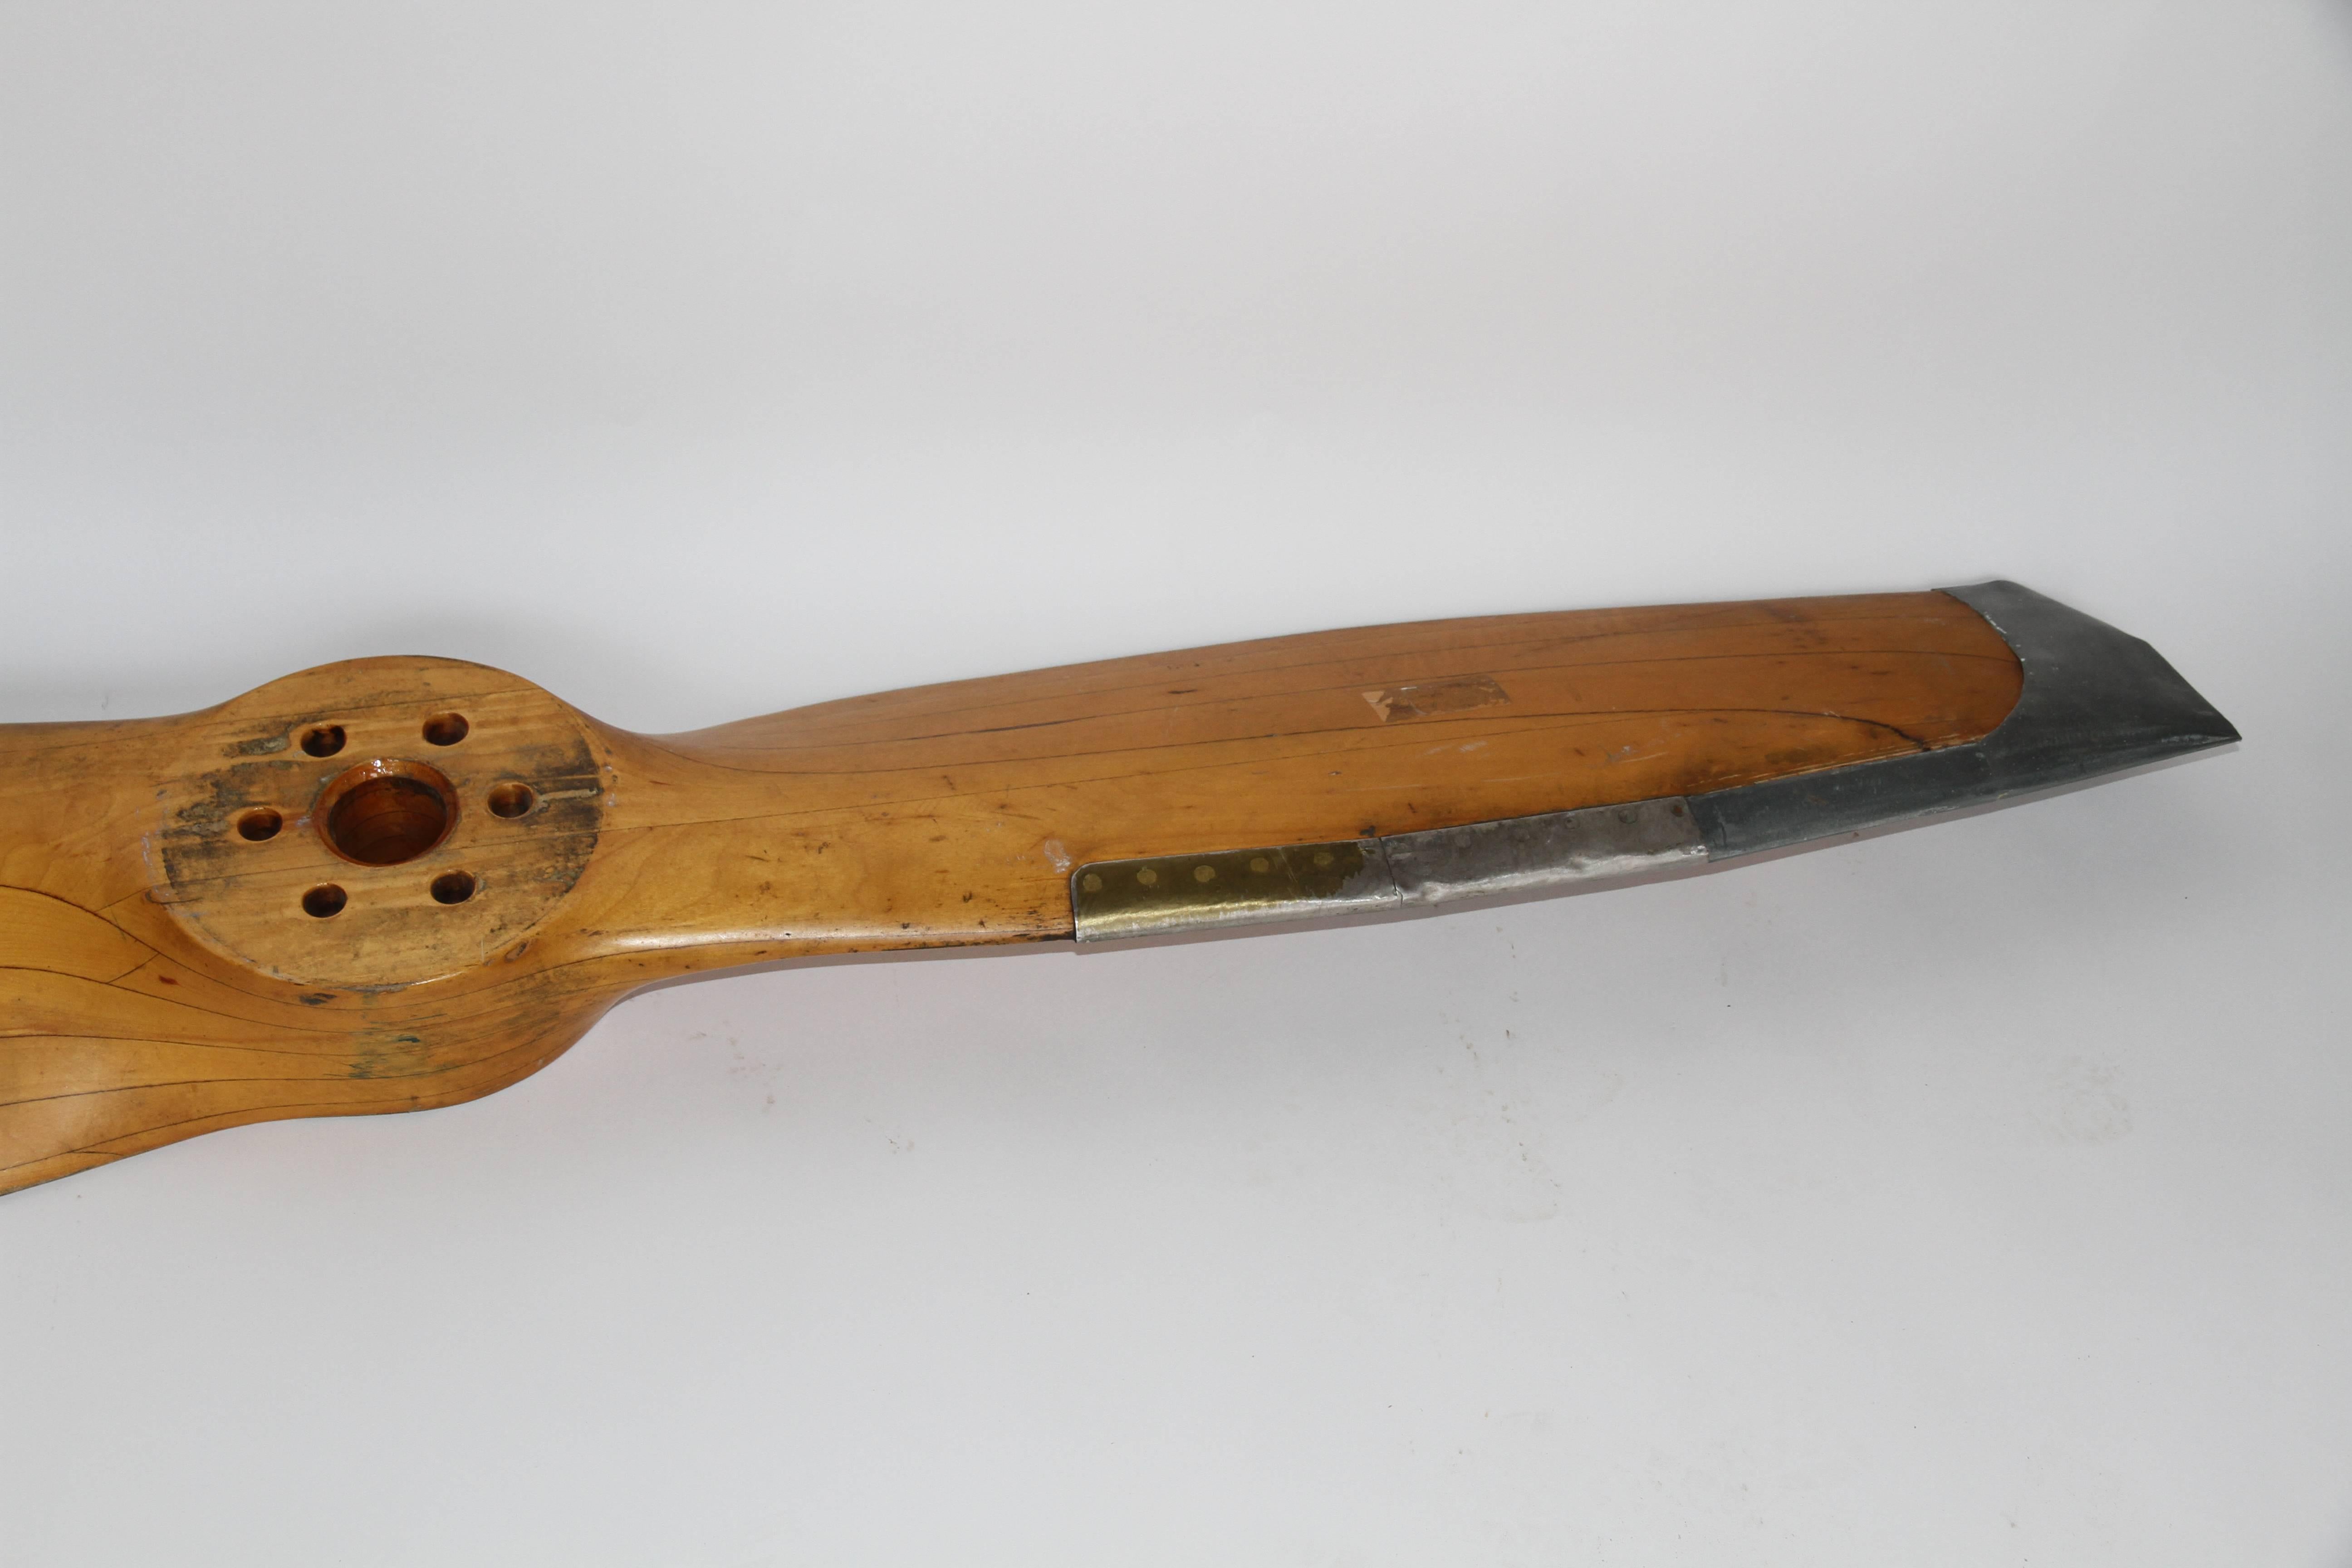 20th century hardwood two-blade metal tipped propeller stamped 78LXL50 5613. This propeller was made from solid wood planes sculpted and glued together. The blades are edged with metal to protect the propeller from wind blown objects.